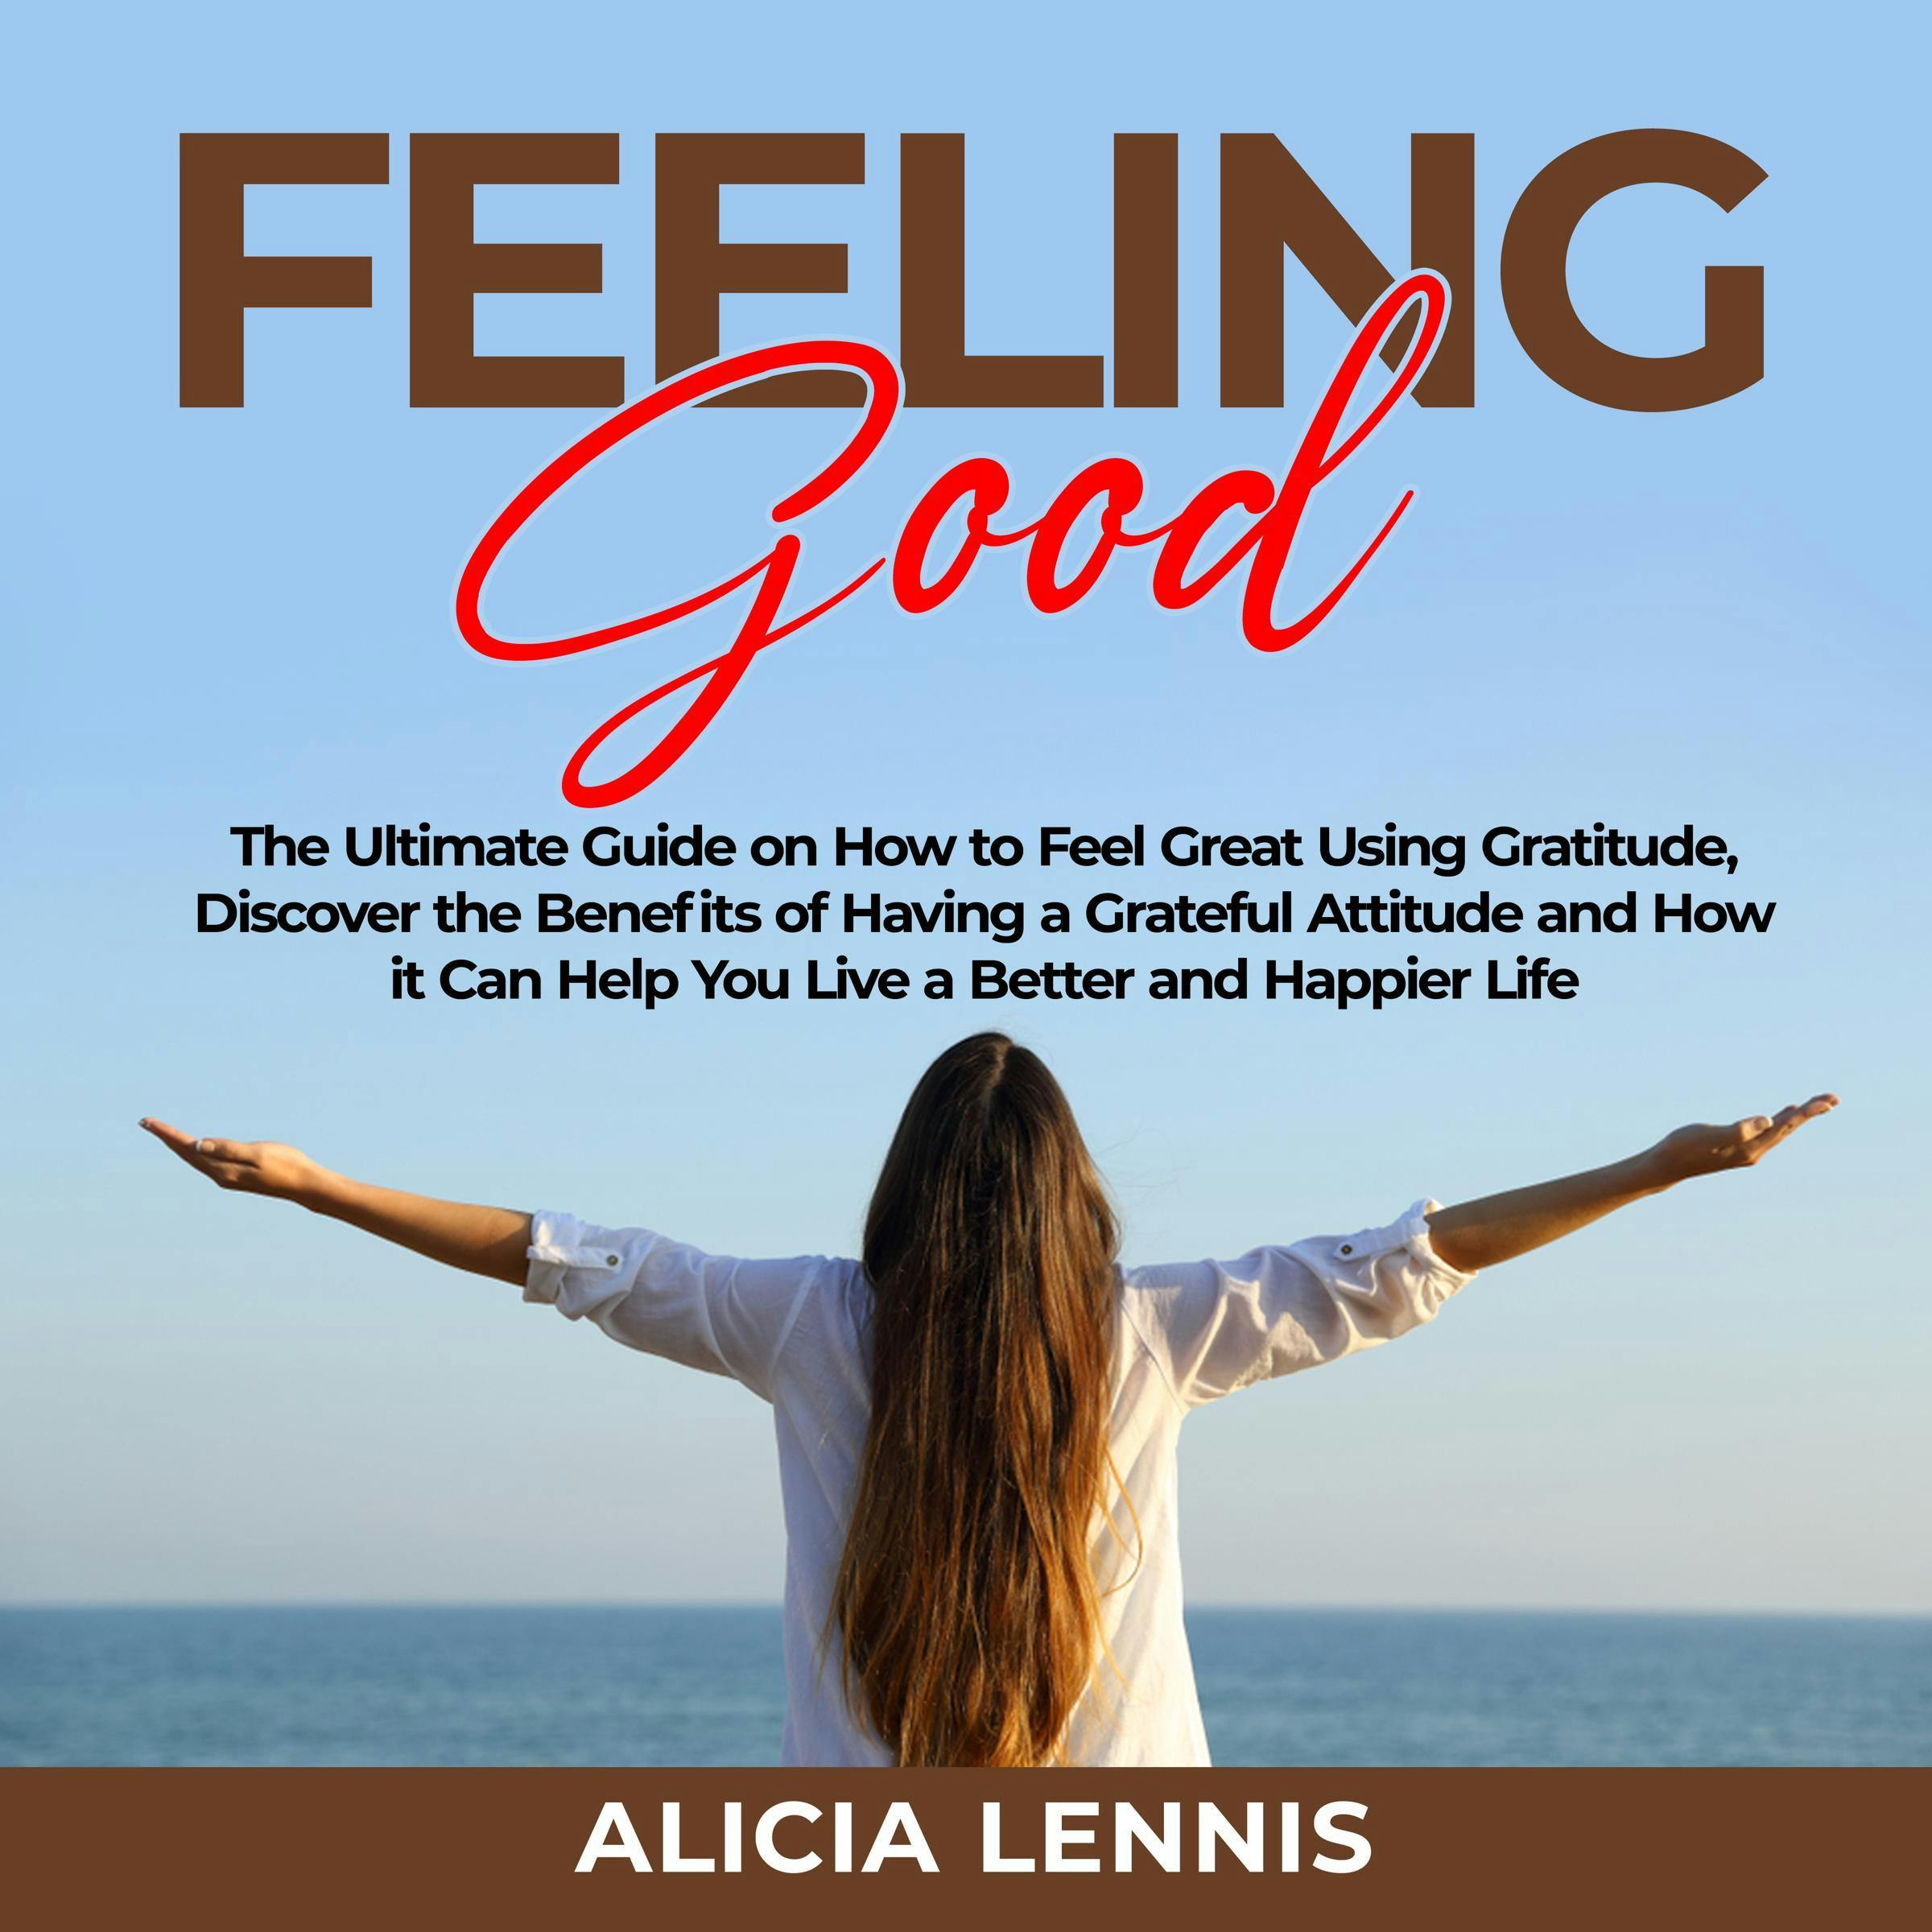 Feeling Good: The Ultimate Guide on How to Feel Great Using Gratitude, Discover the Benefits of Having a Grateful Attitude and How it Can Help You Live a Better and Happier Life - Alicia Lennis